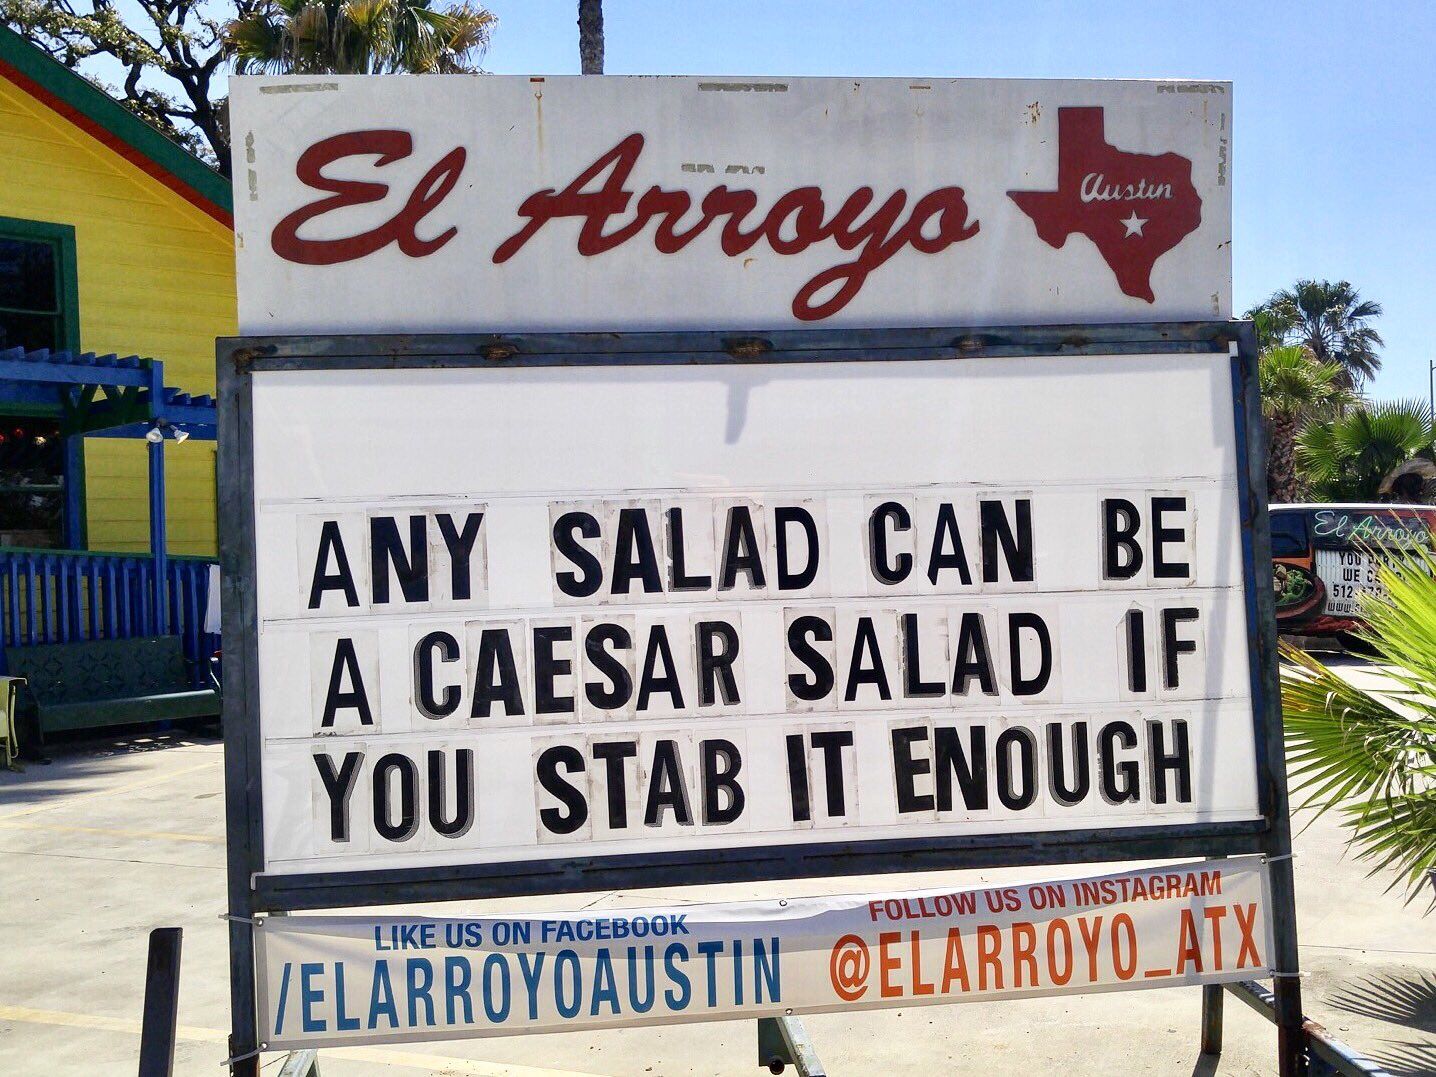 A sign saying "ANY SALAD CAN BE A CAESAR SALAD IF YOU STAB IT ENOUGH"